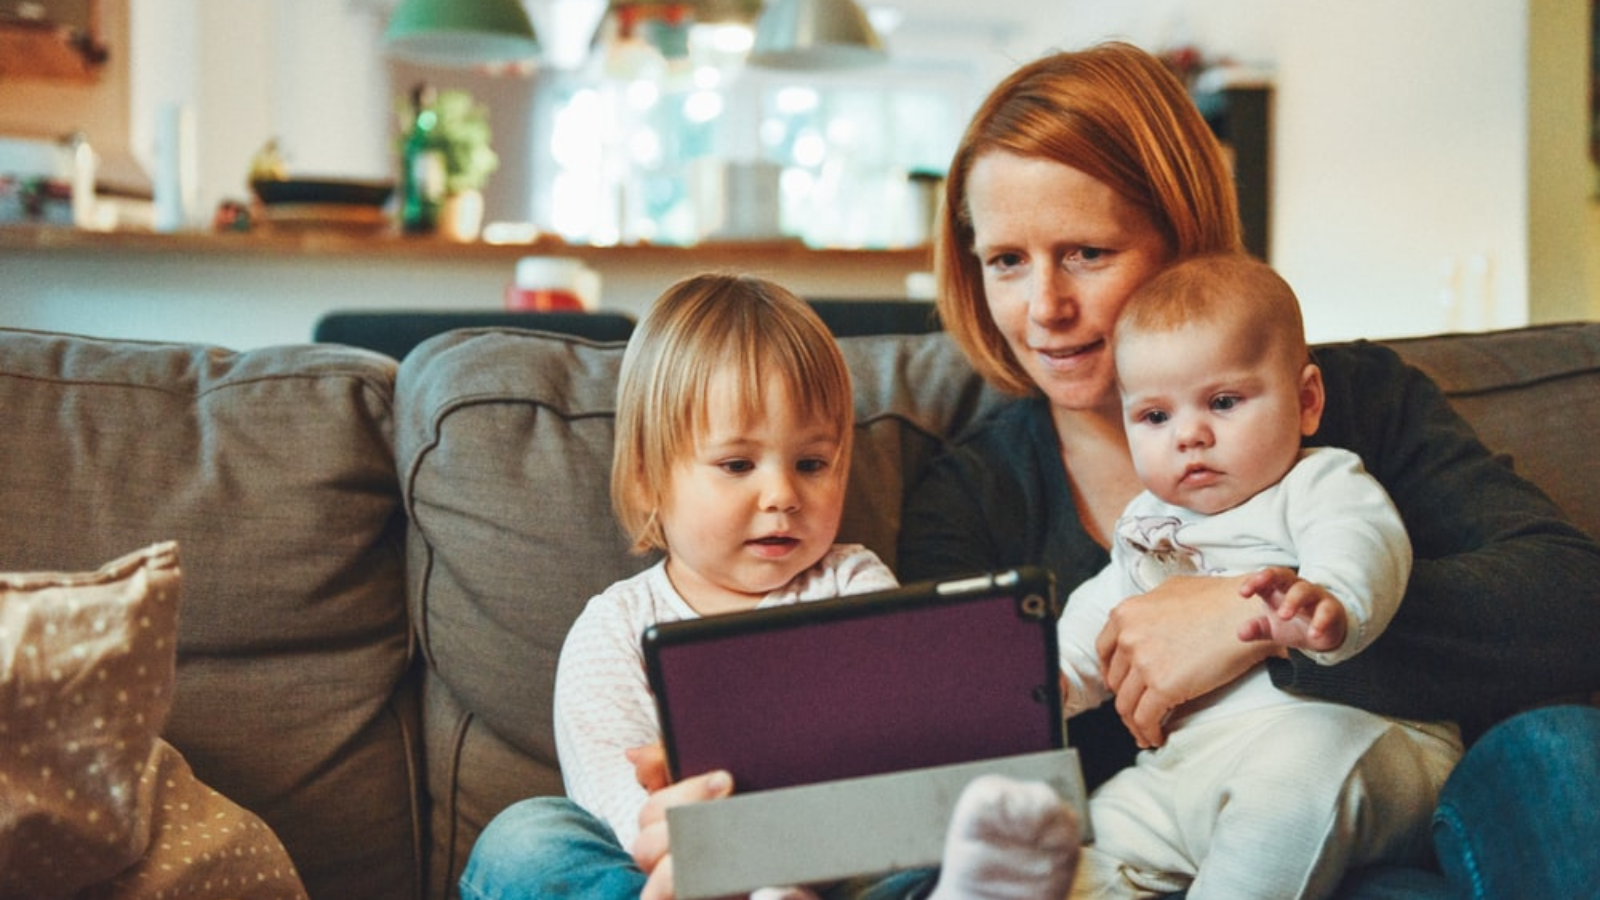 A mom holding her young children while using a tablet custody